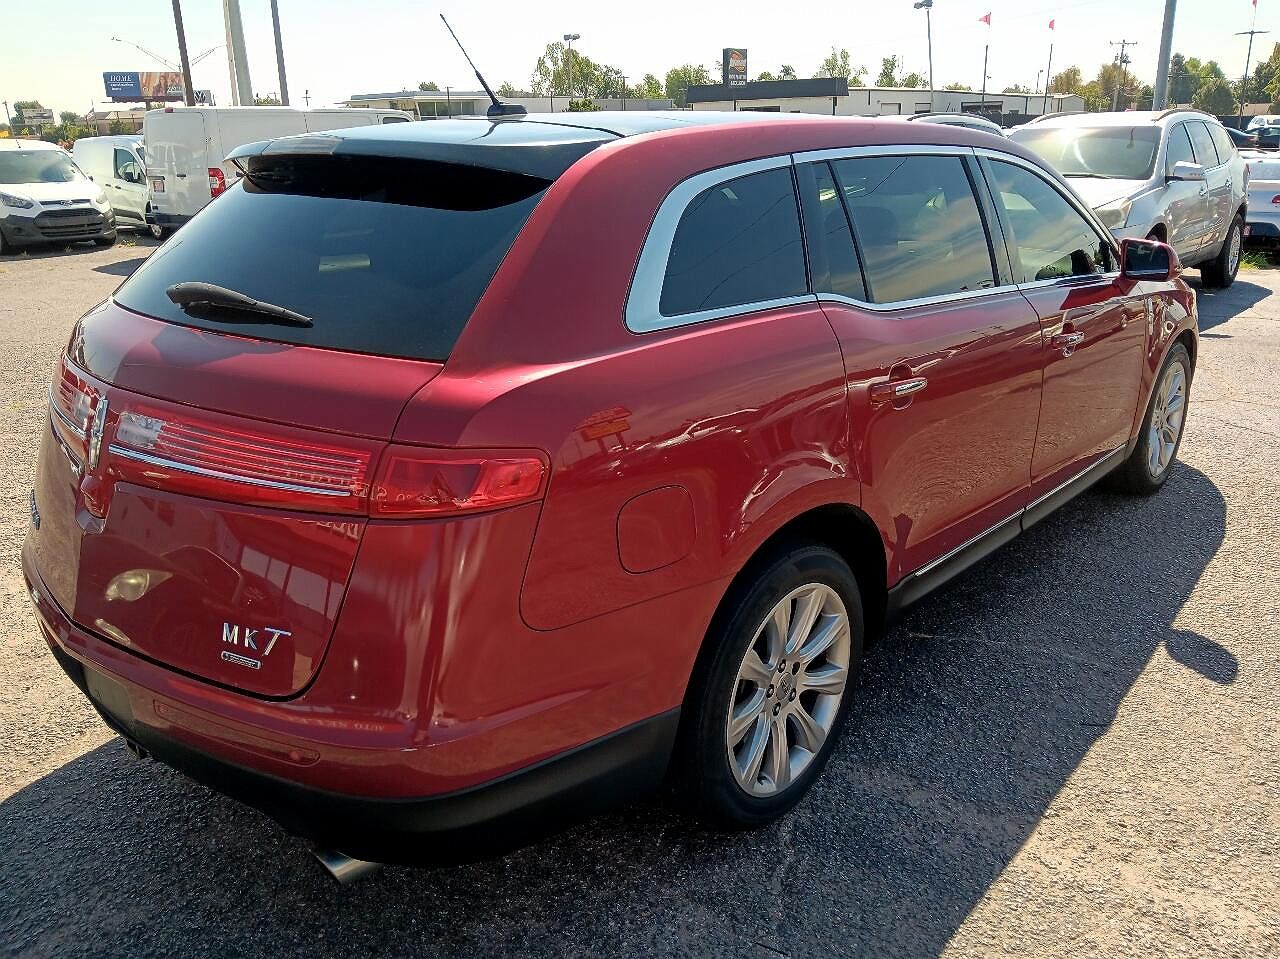 2013 Lincoln MKT null image 5